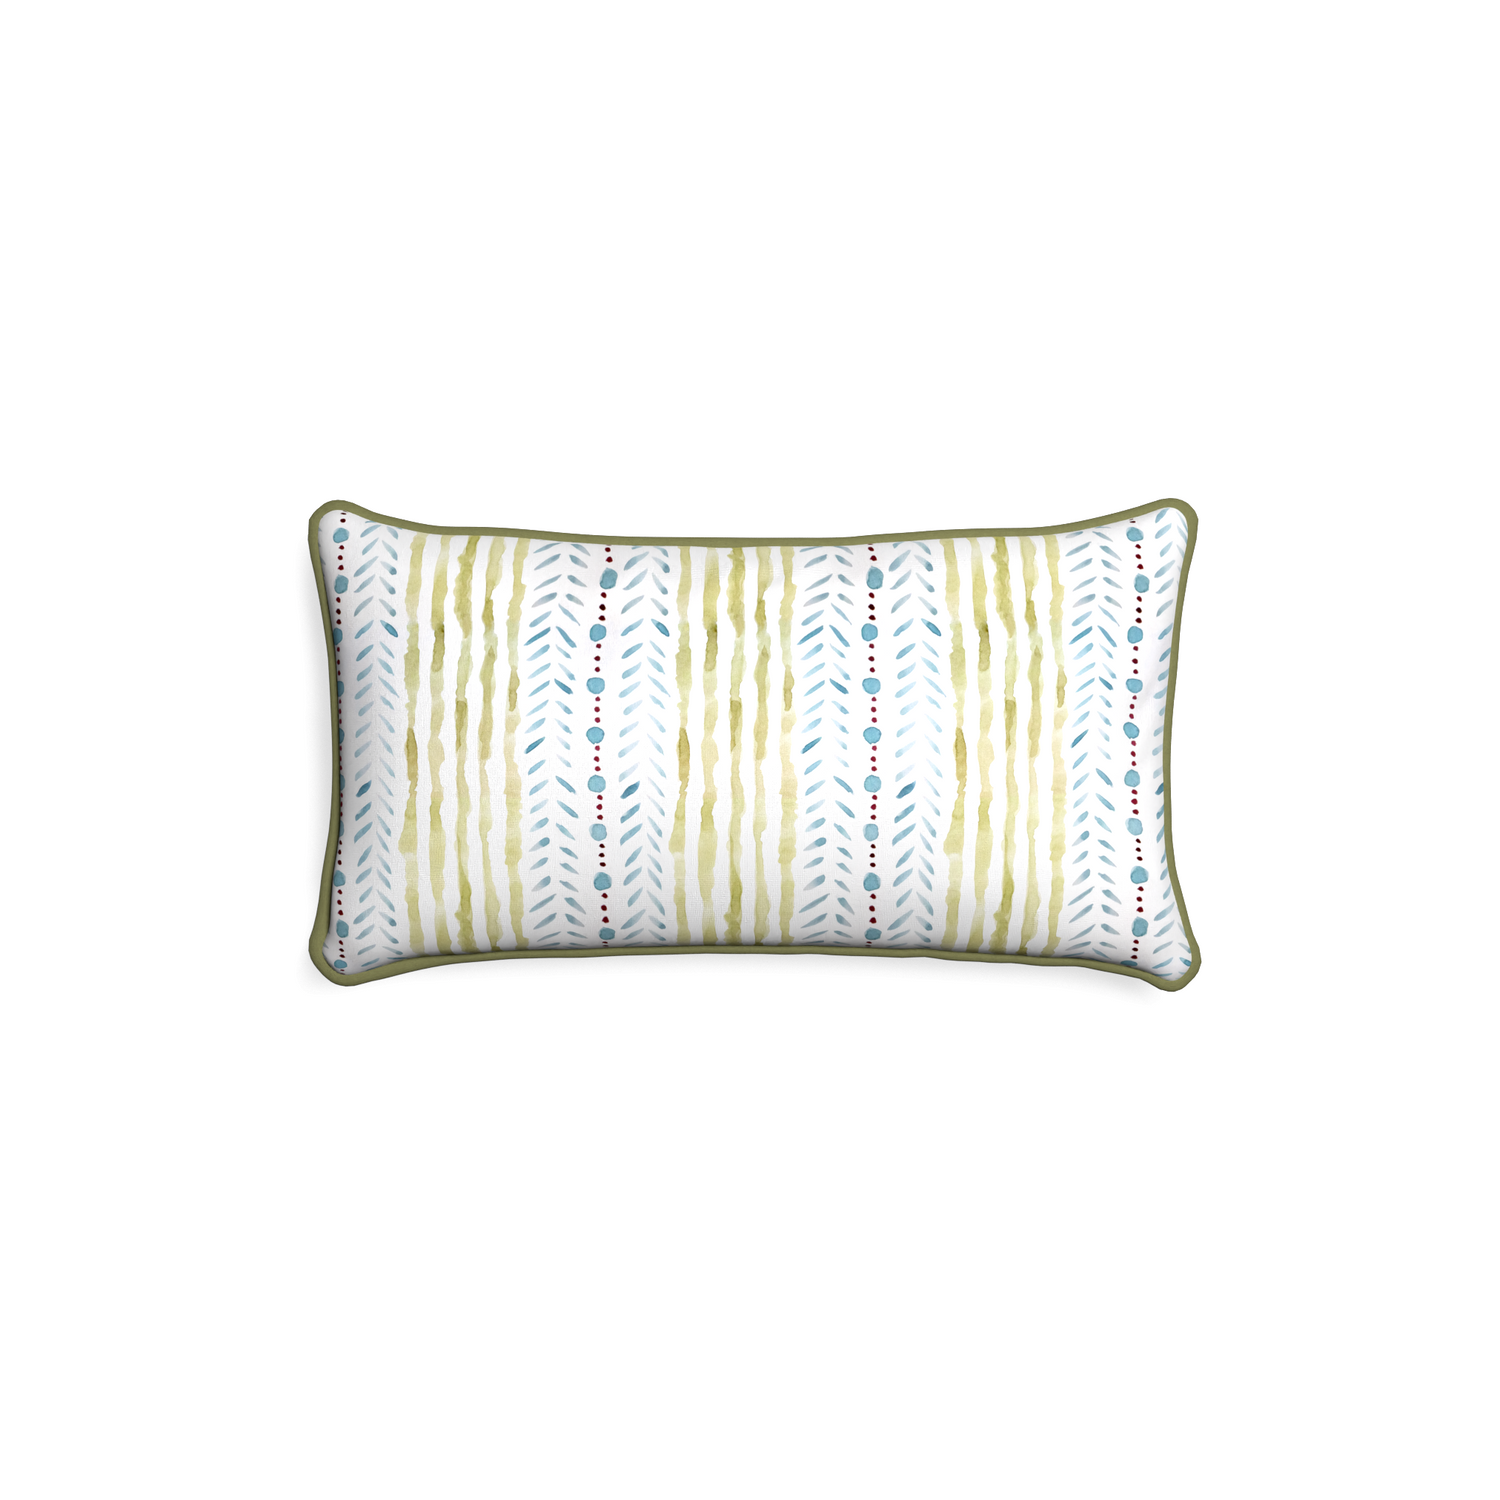 rectangle blue and green striped pillow with moss green piping